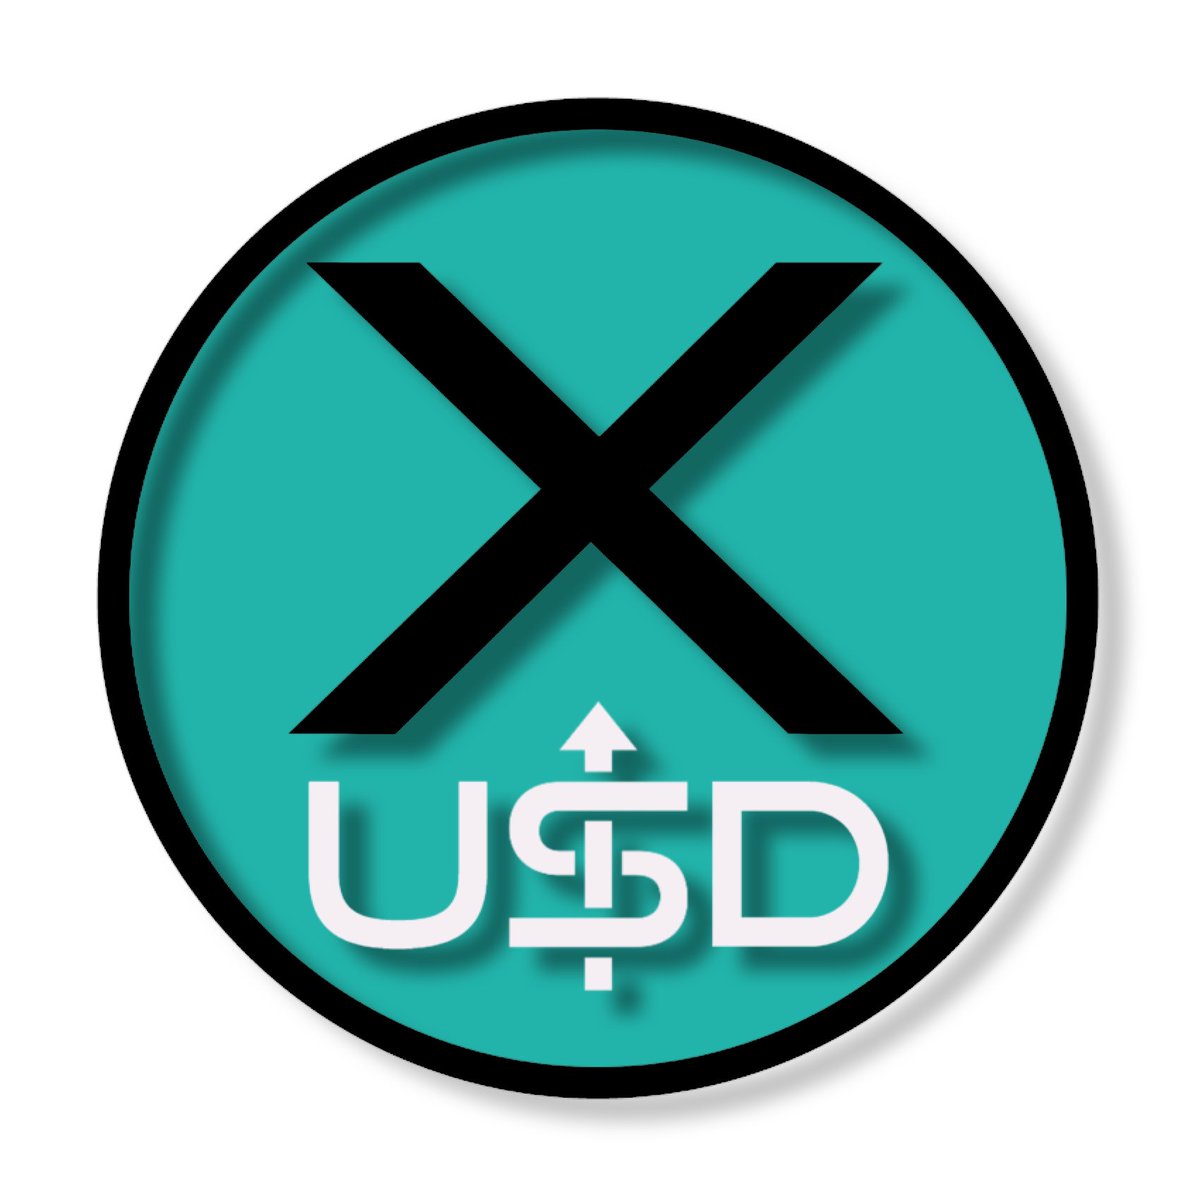 xUSD's price is 1.267421603782874817, which is up 26.742% since launch. #xUSD: #DeFi's best stablecoin staking protocol and collaborative token. #BuyTheRise